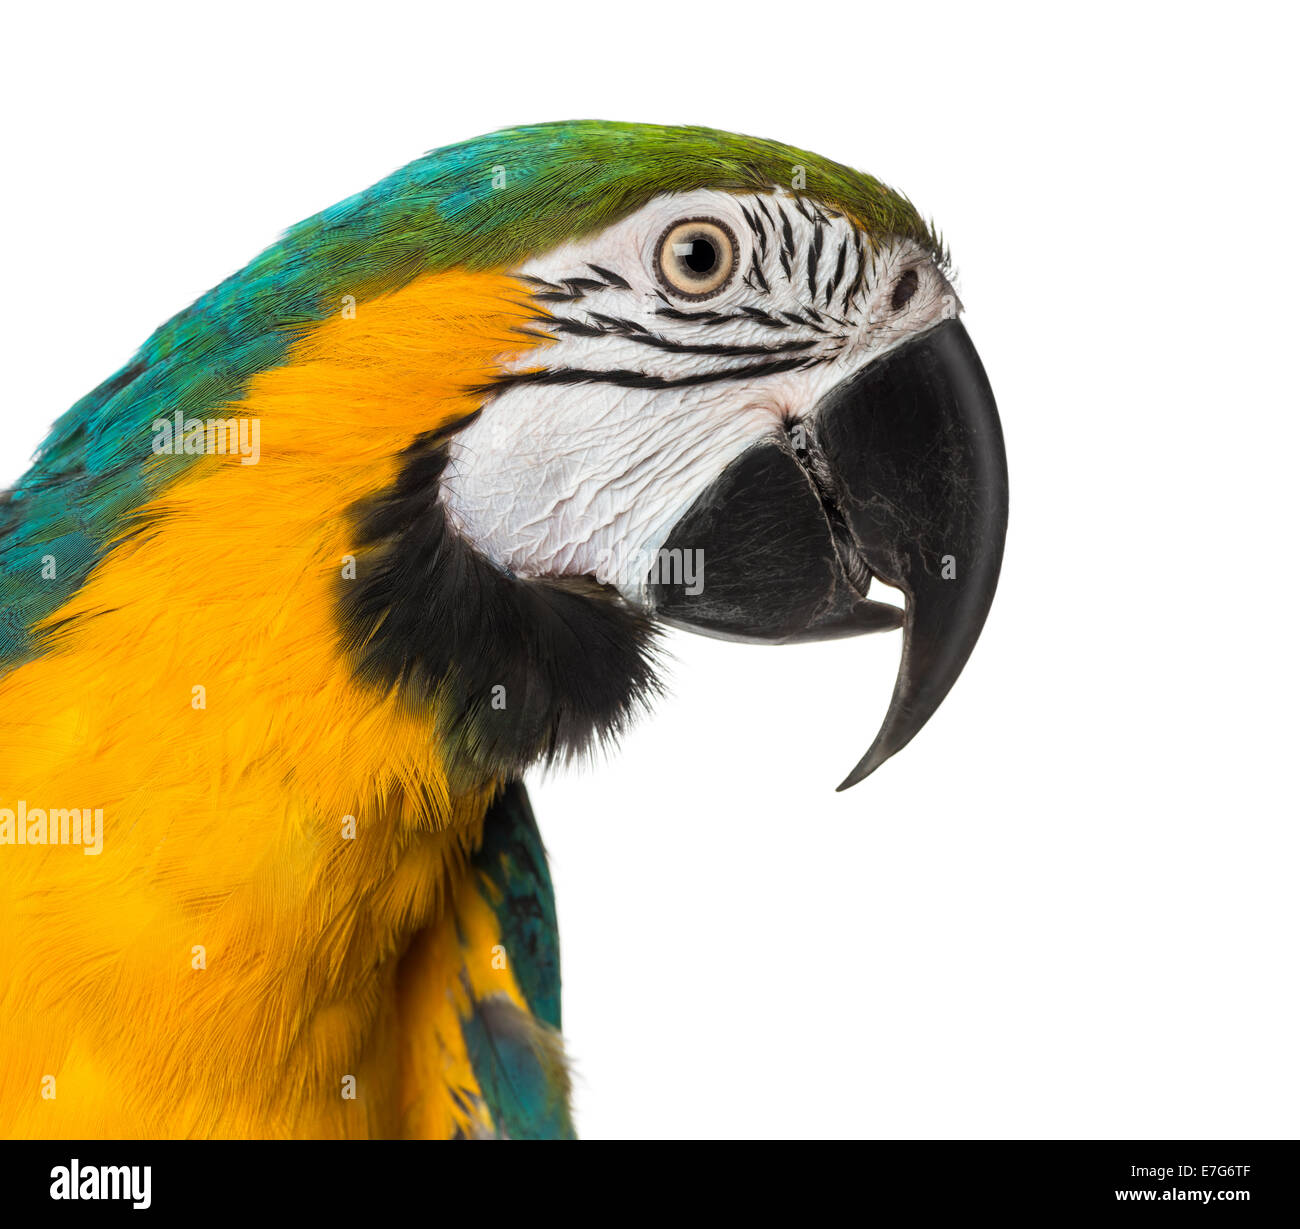 Close-up of a Blue-and-yellow Macaw in front of a white background Stock Photo